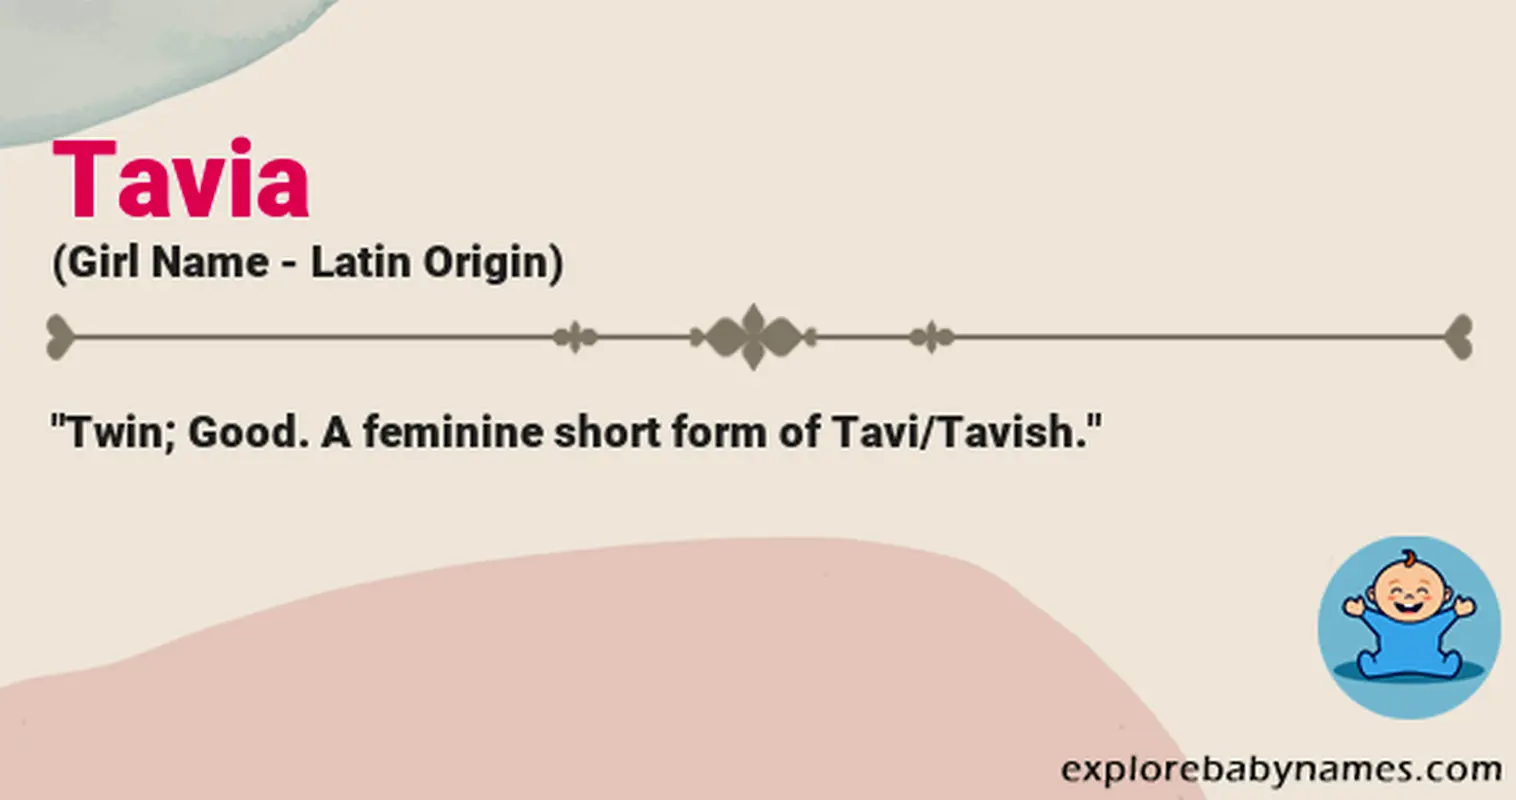 Meaning of Tavia